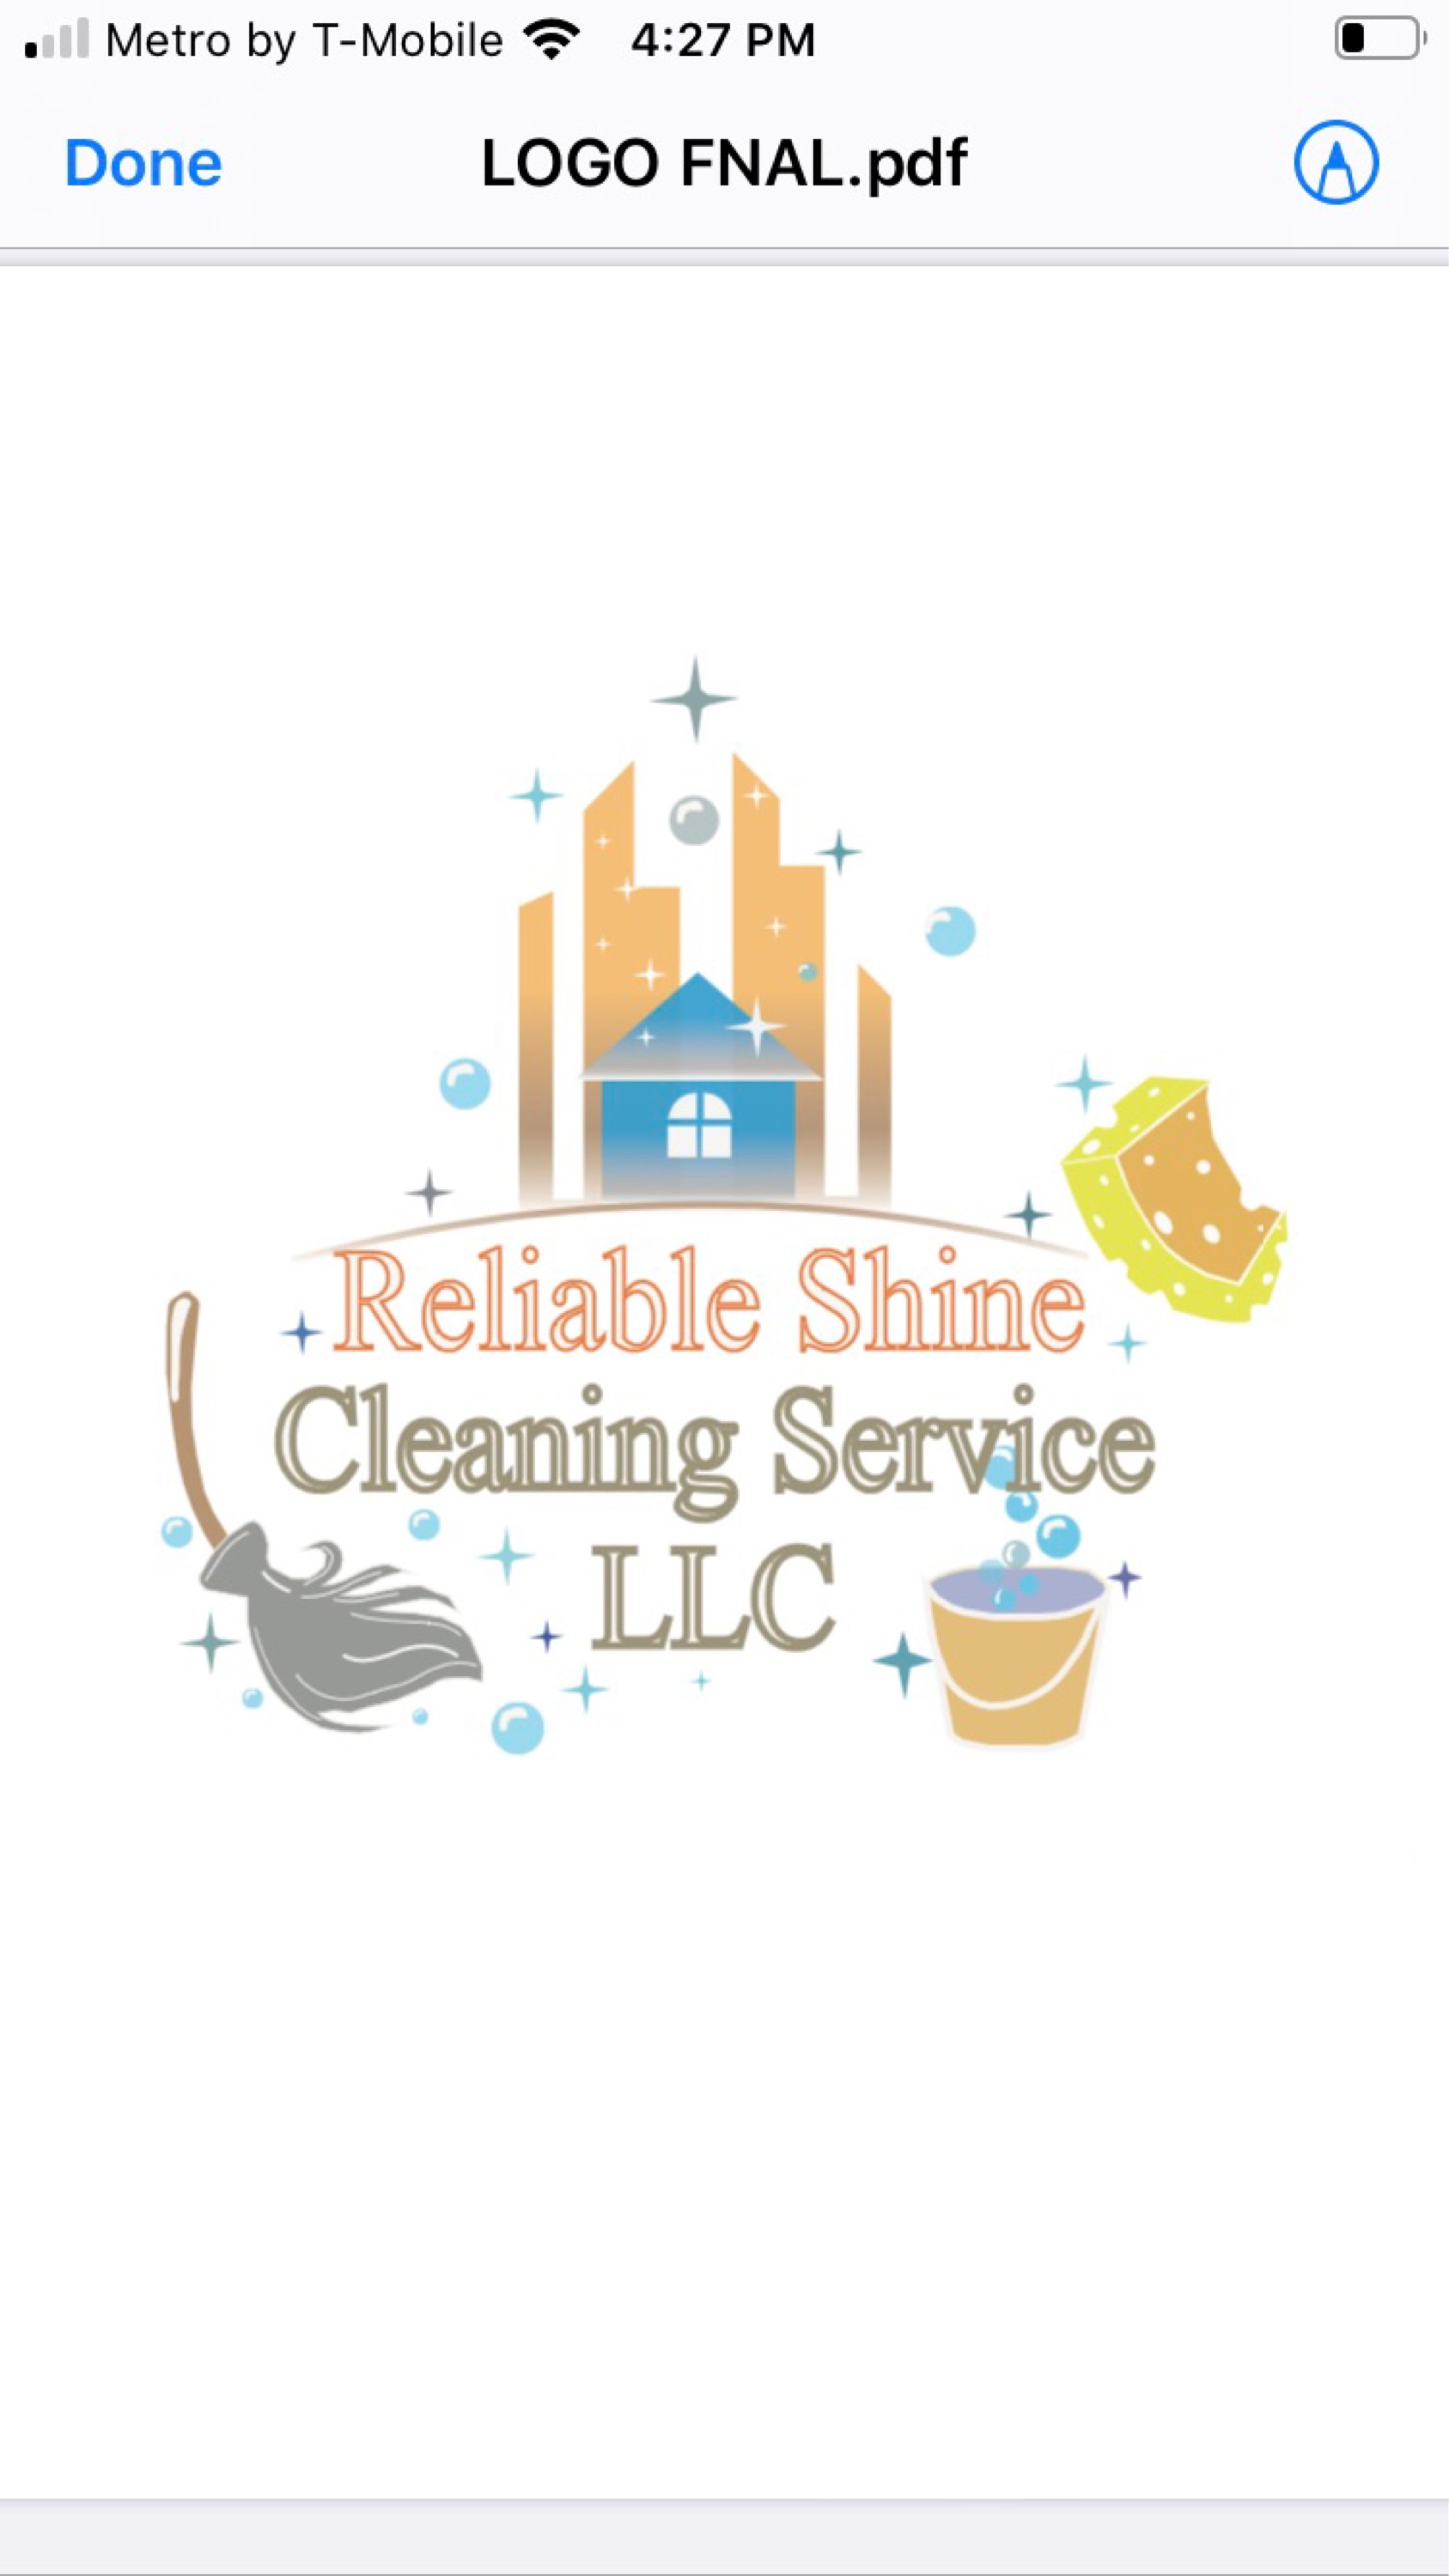 Reliable Shine Cleaning Service Logo